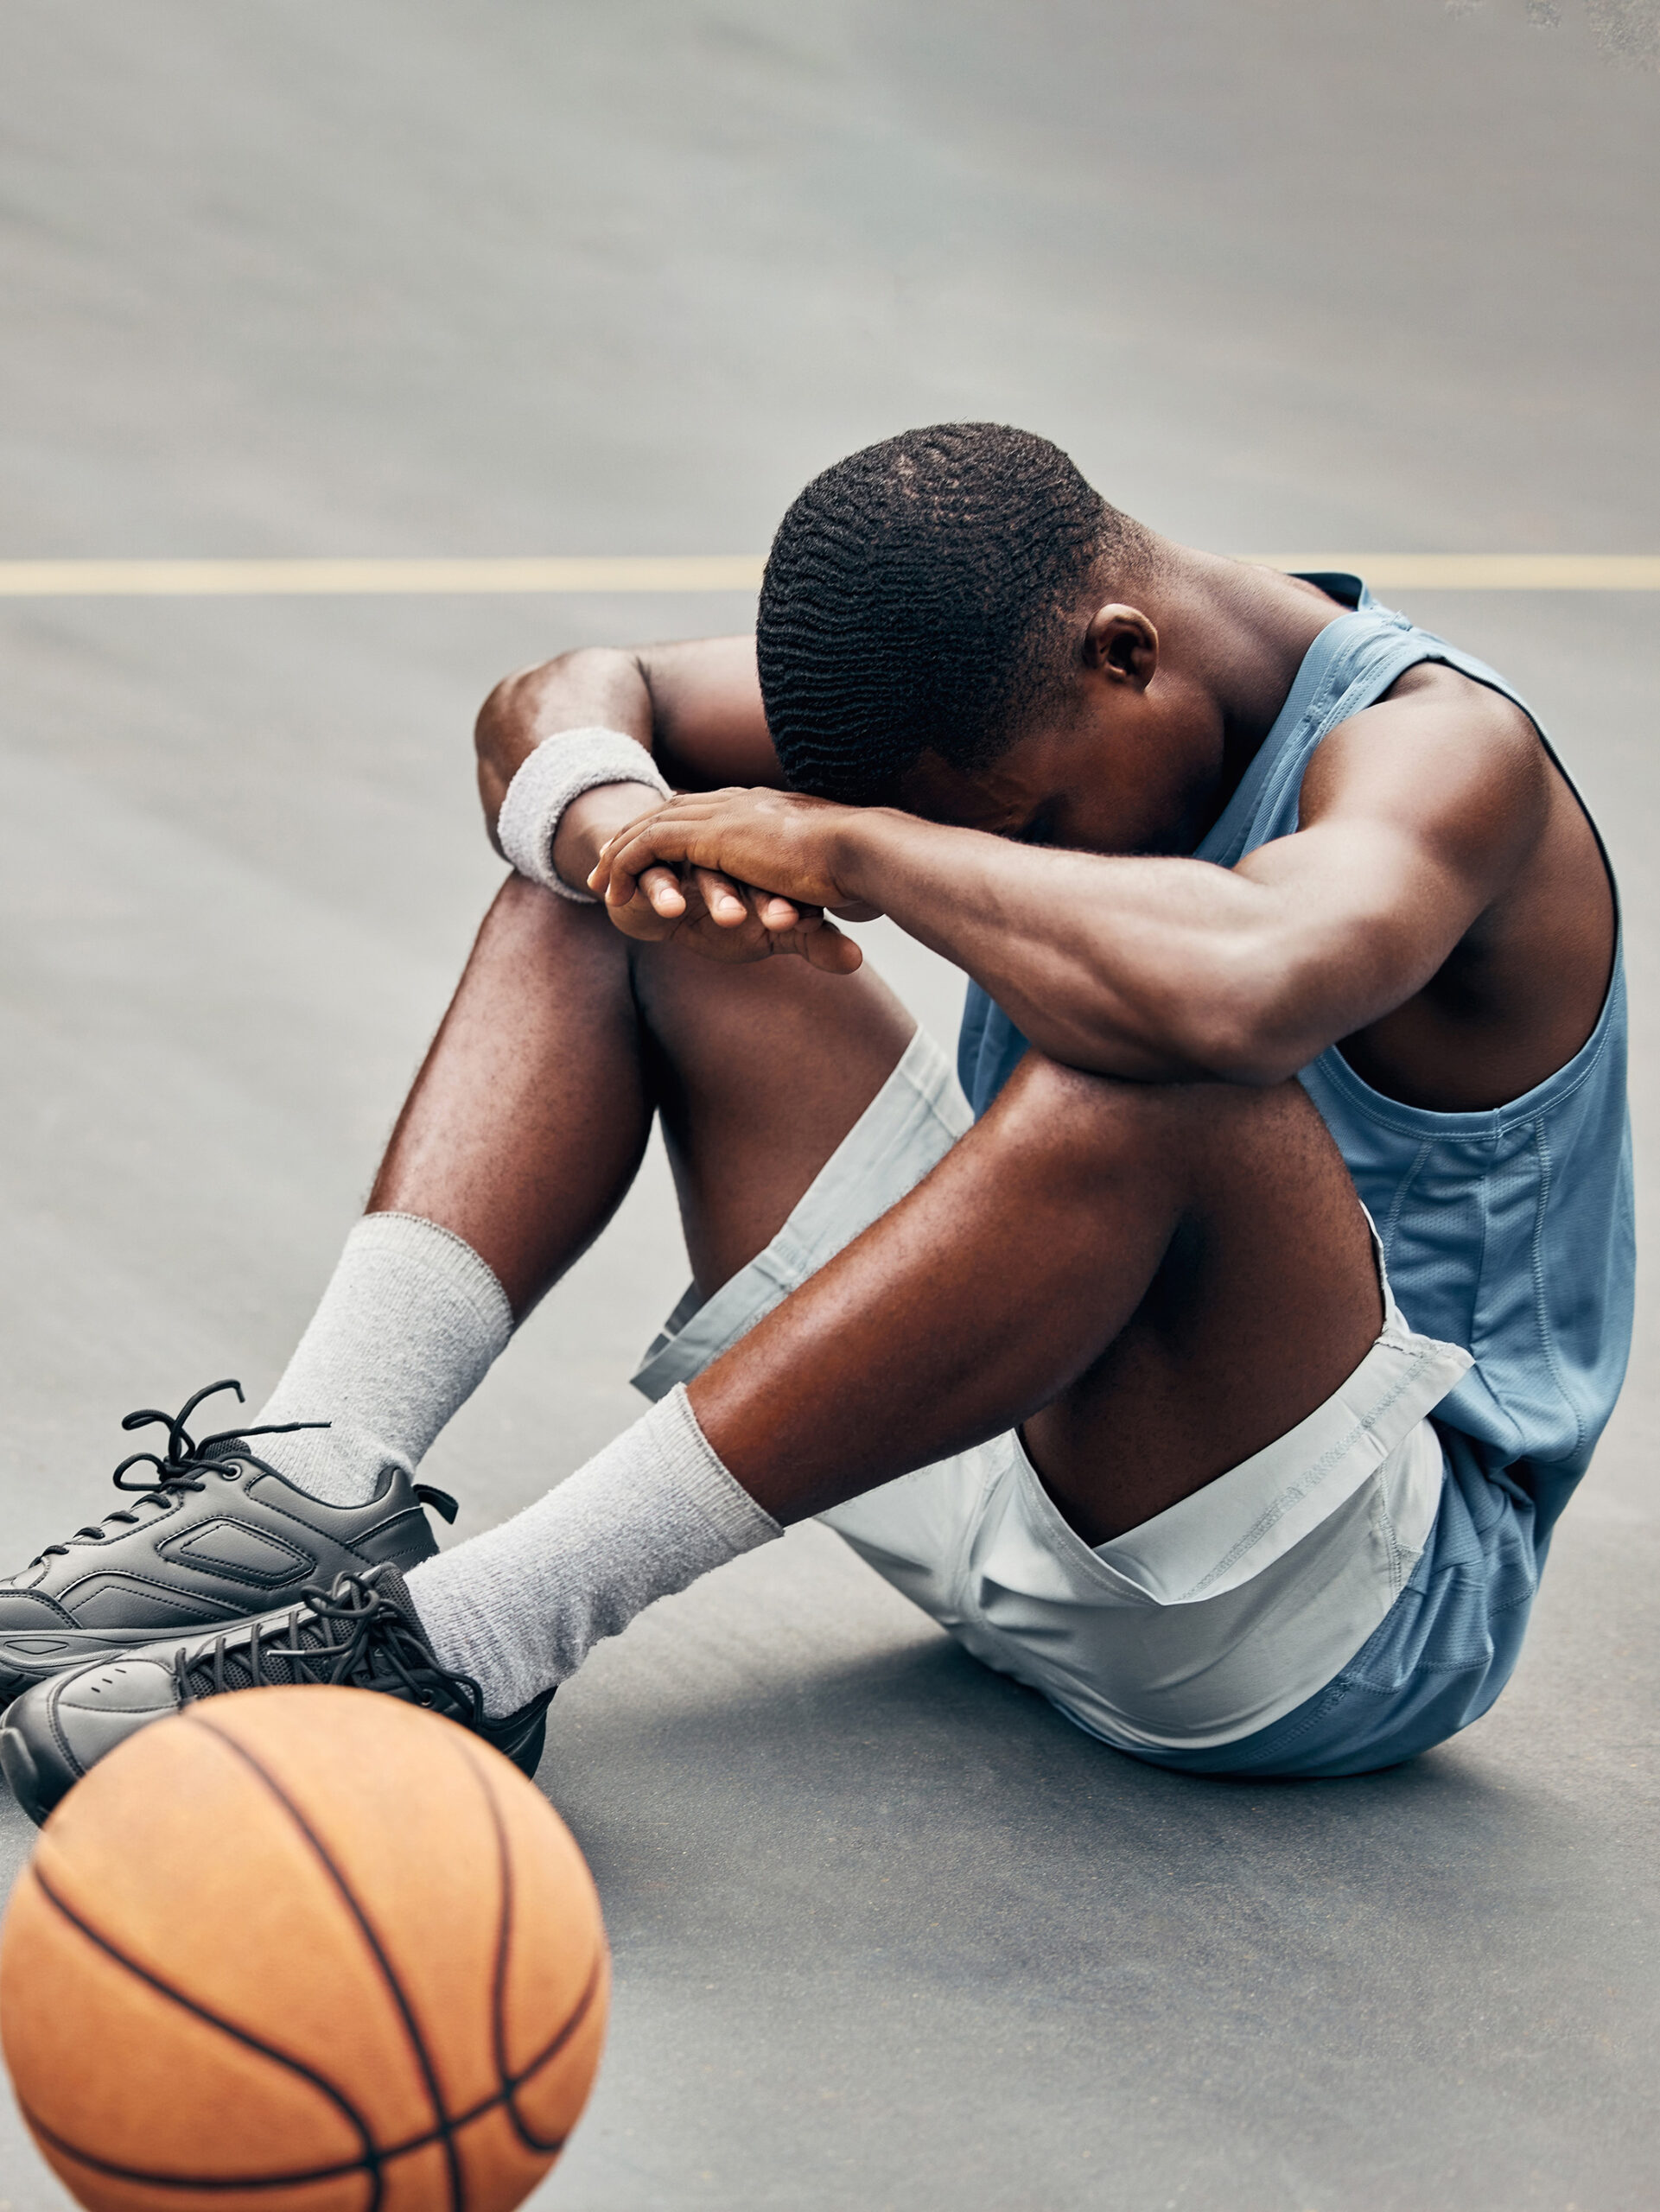 How to prevent burnout in young athletes